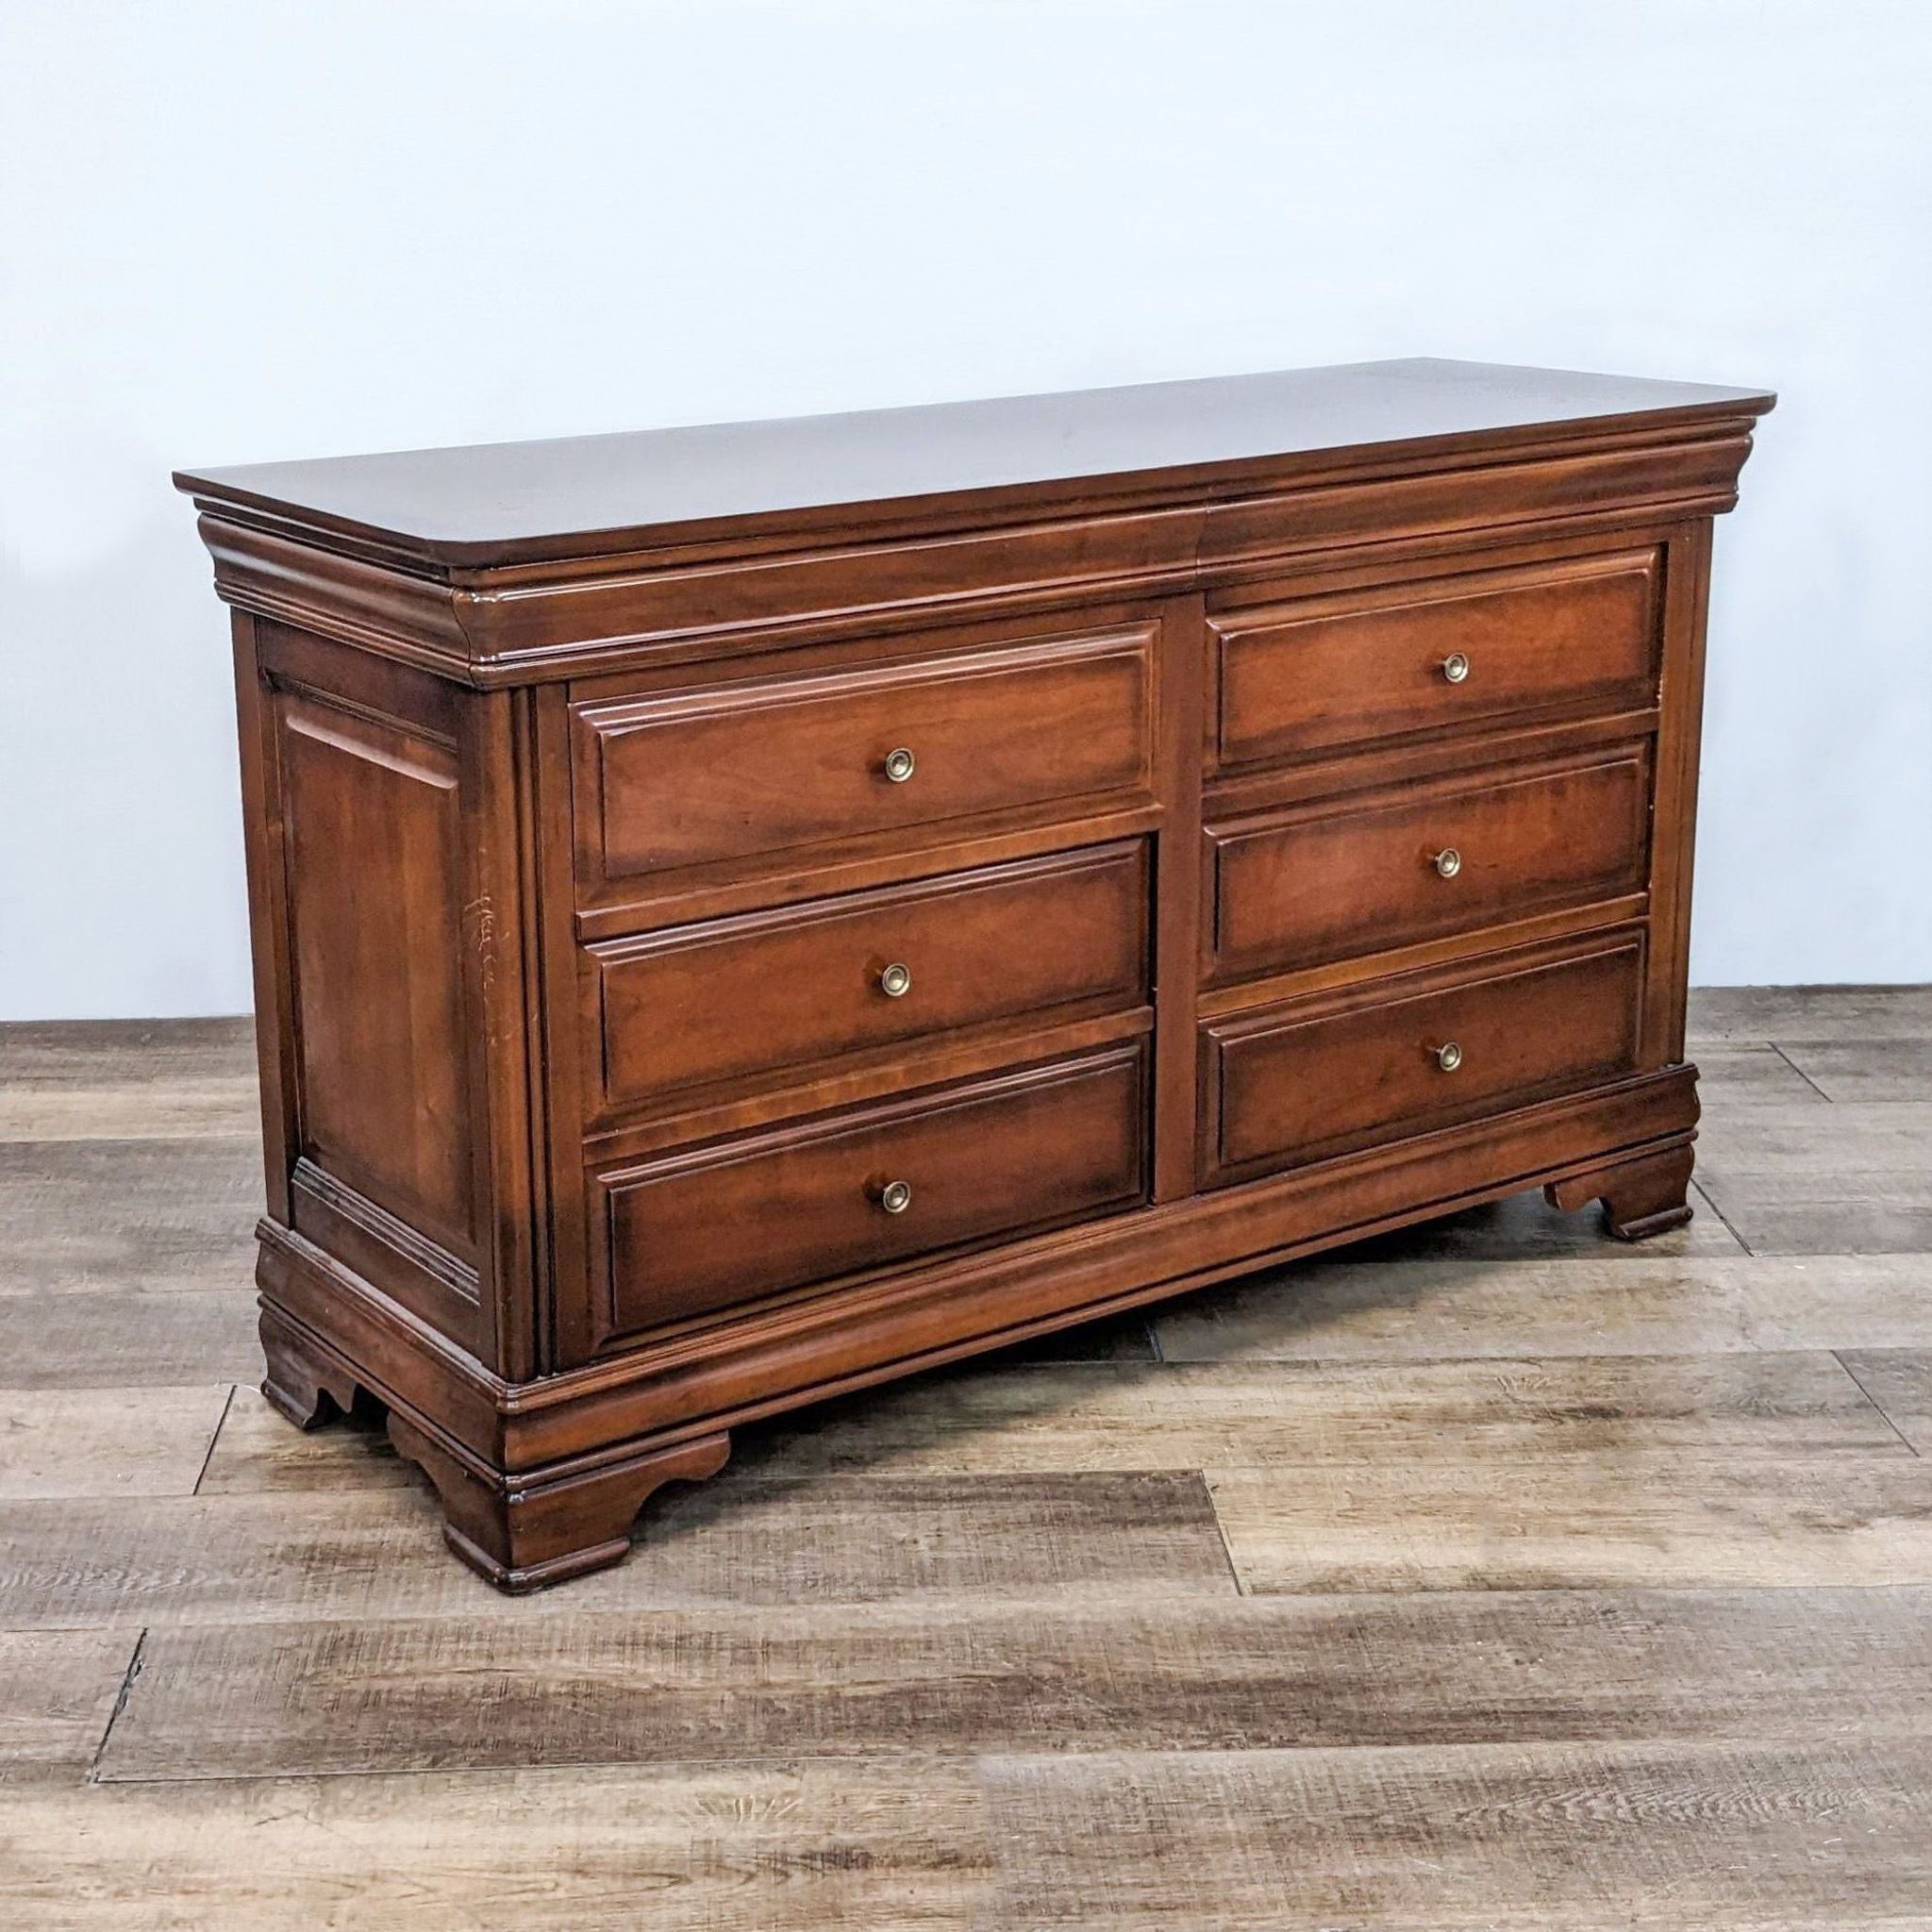 Reperch traditional 8-drawer dresser with antique brass metal knobs and dovetail joinery on a wooden floor.